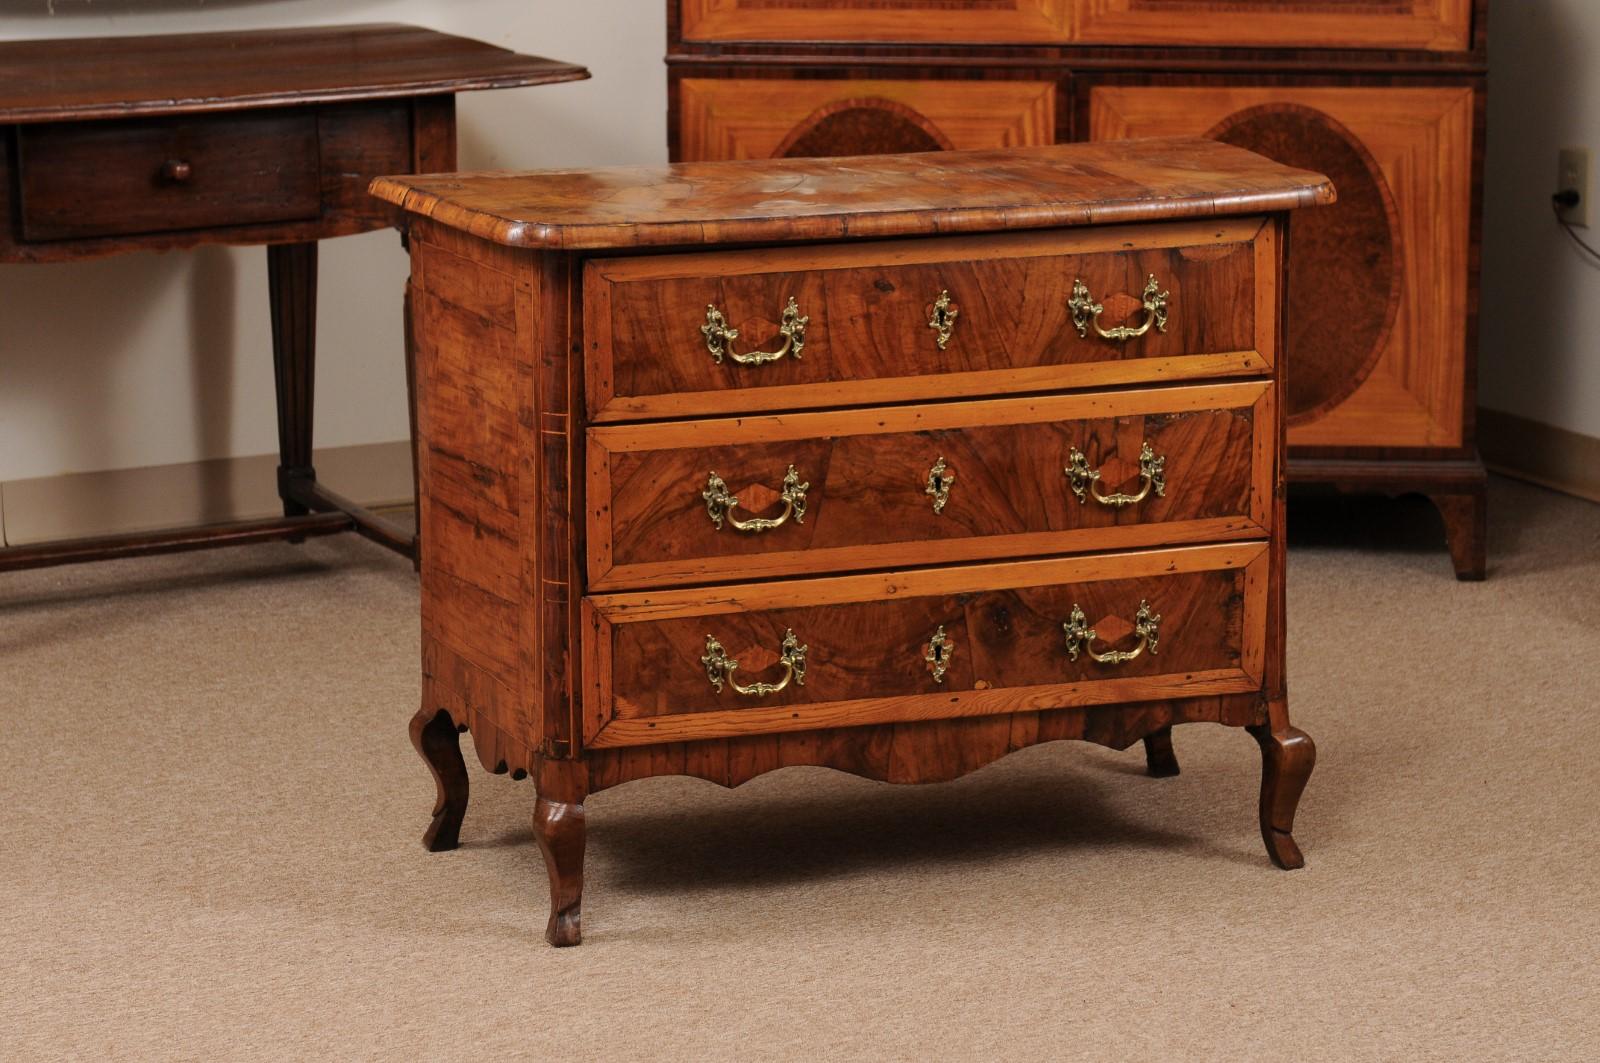 18th Century Italian 3-Drawer Commode in Olivewood with Cabriole Legs In Good Condition For Sale In Atlanta, GA